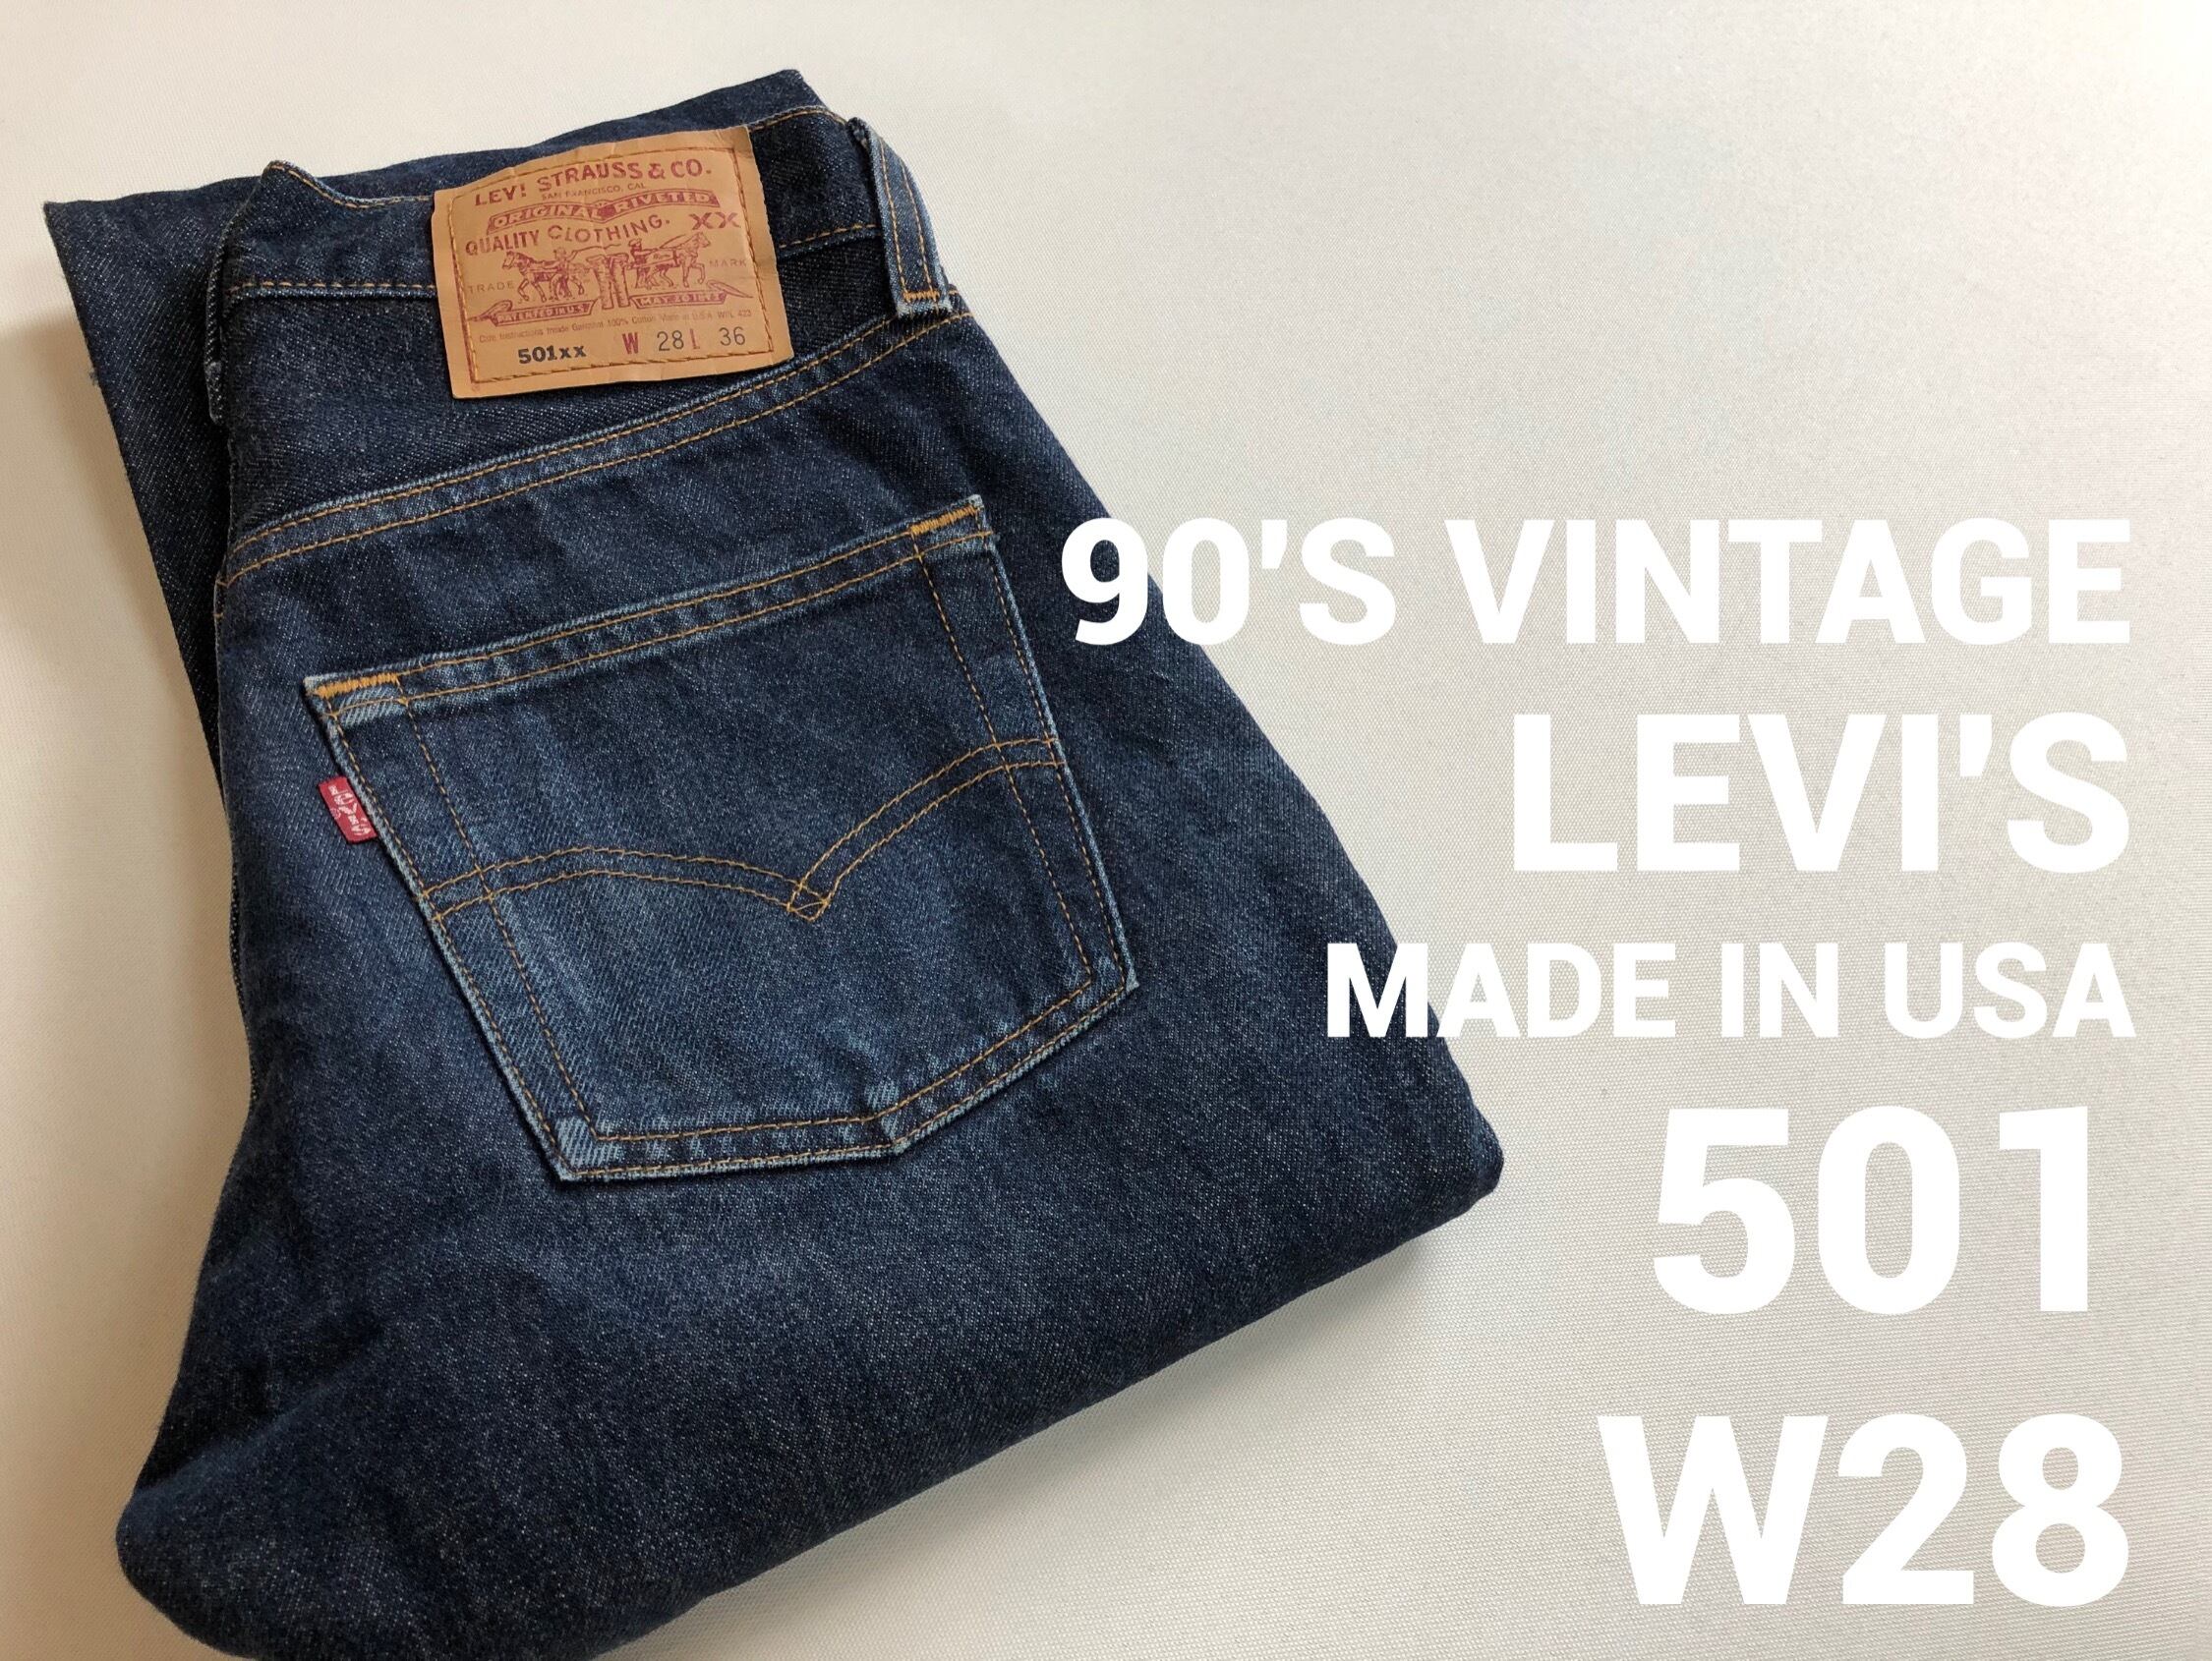 Levi's リーバイス501 made in the USA W28WHITEOAK - デニム/ジーンズ